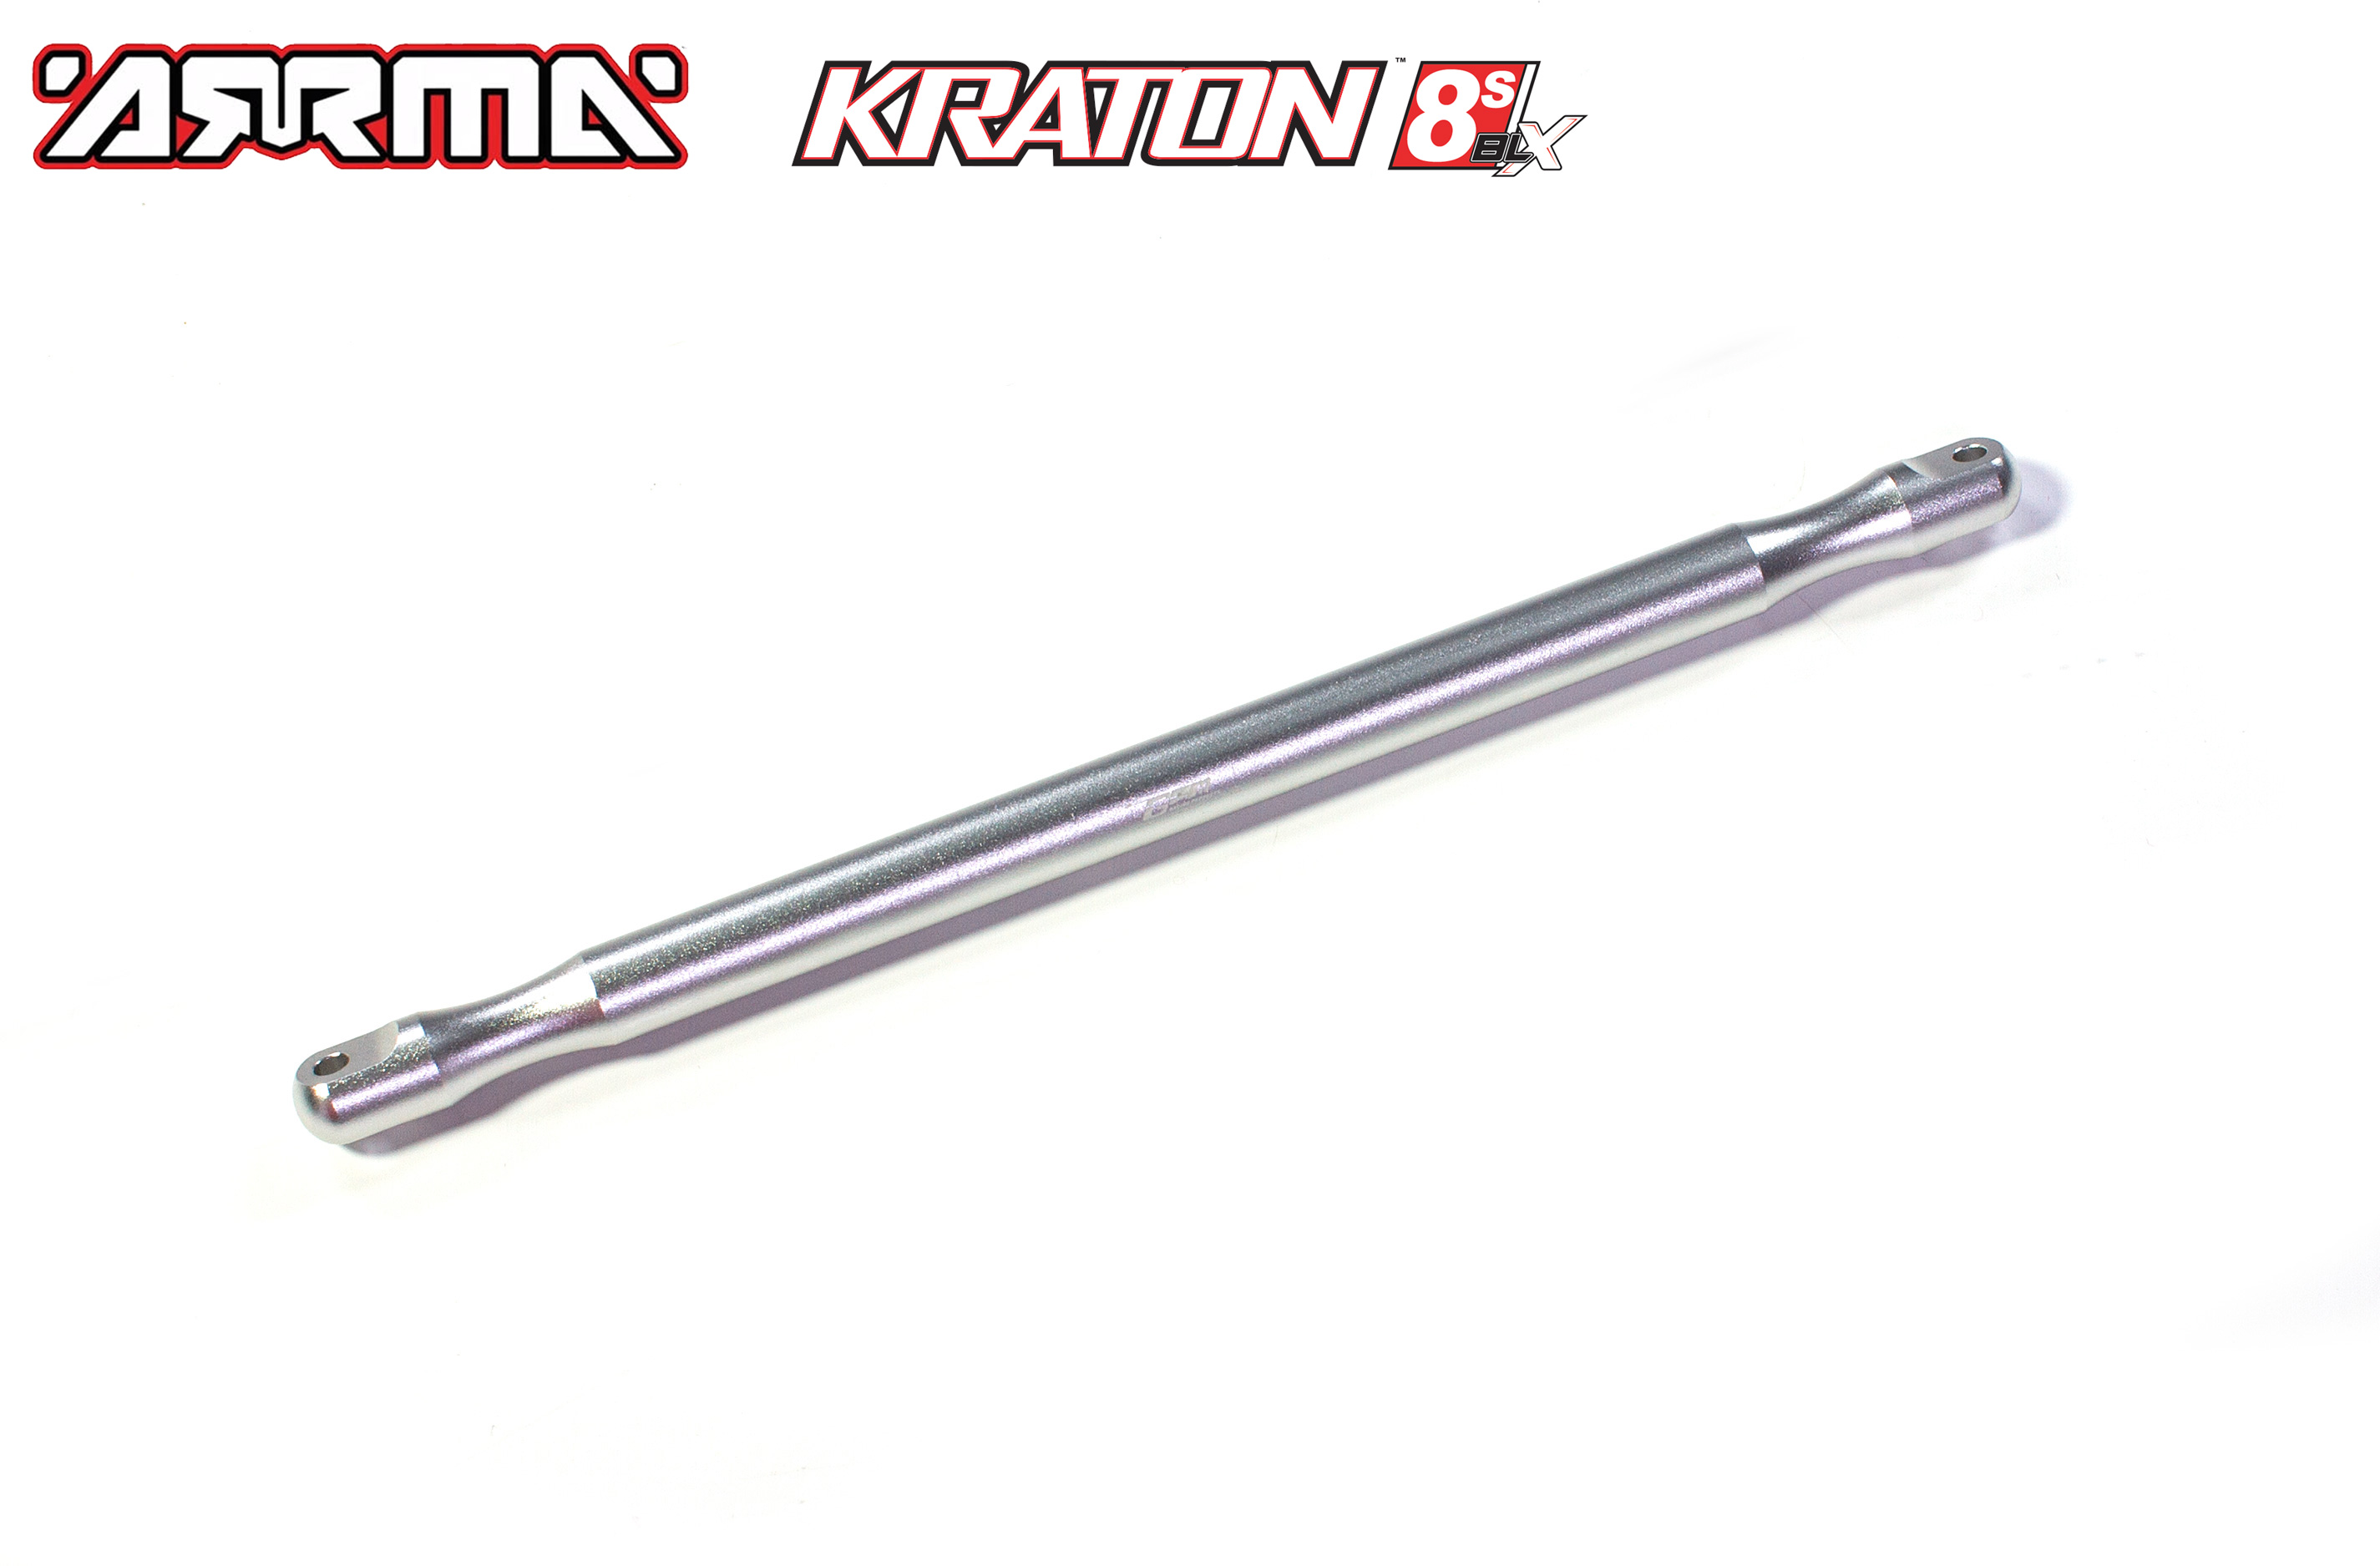 AKX025R GPM rear chassis strut for Arrma Kraton 8S Version 1